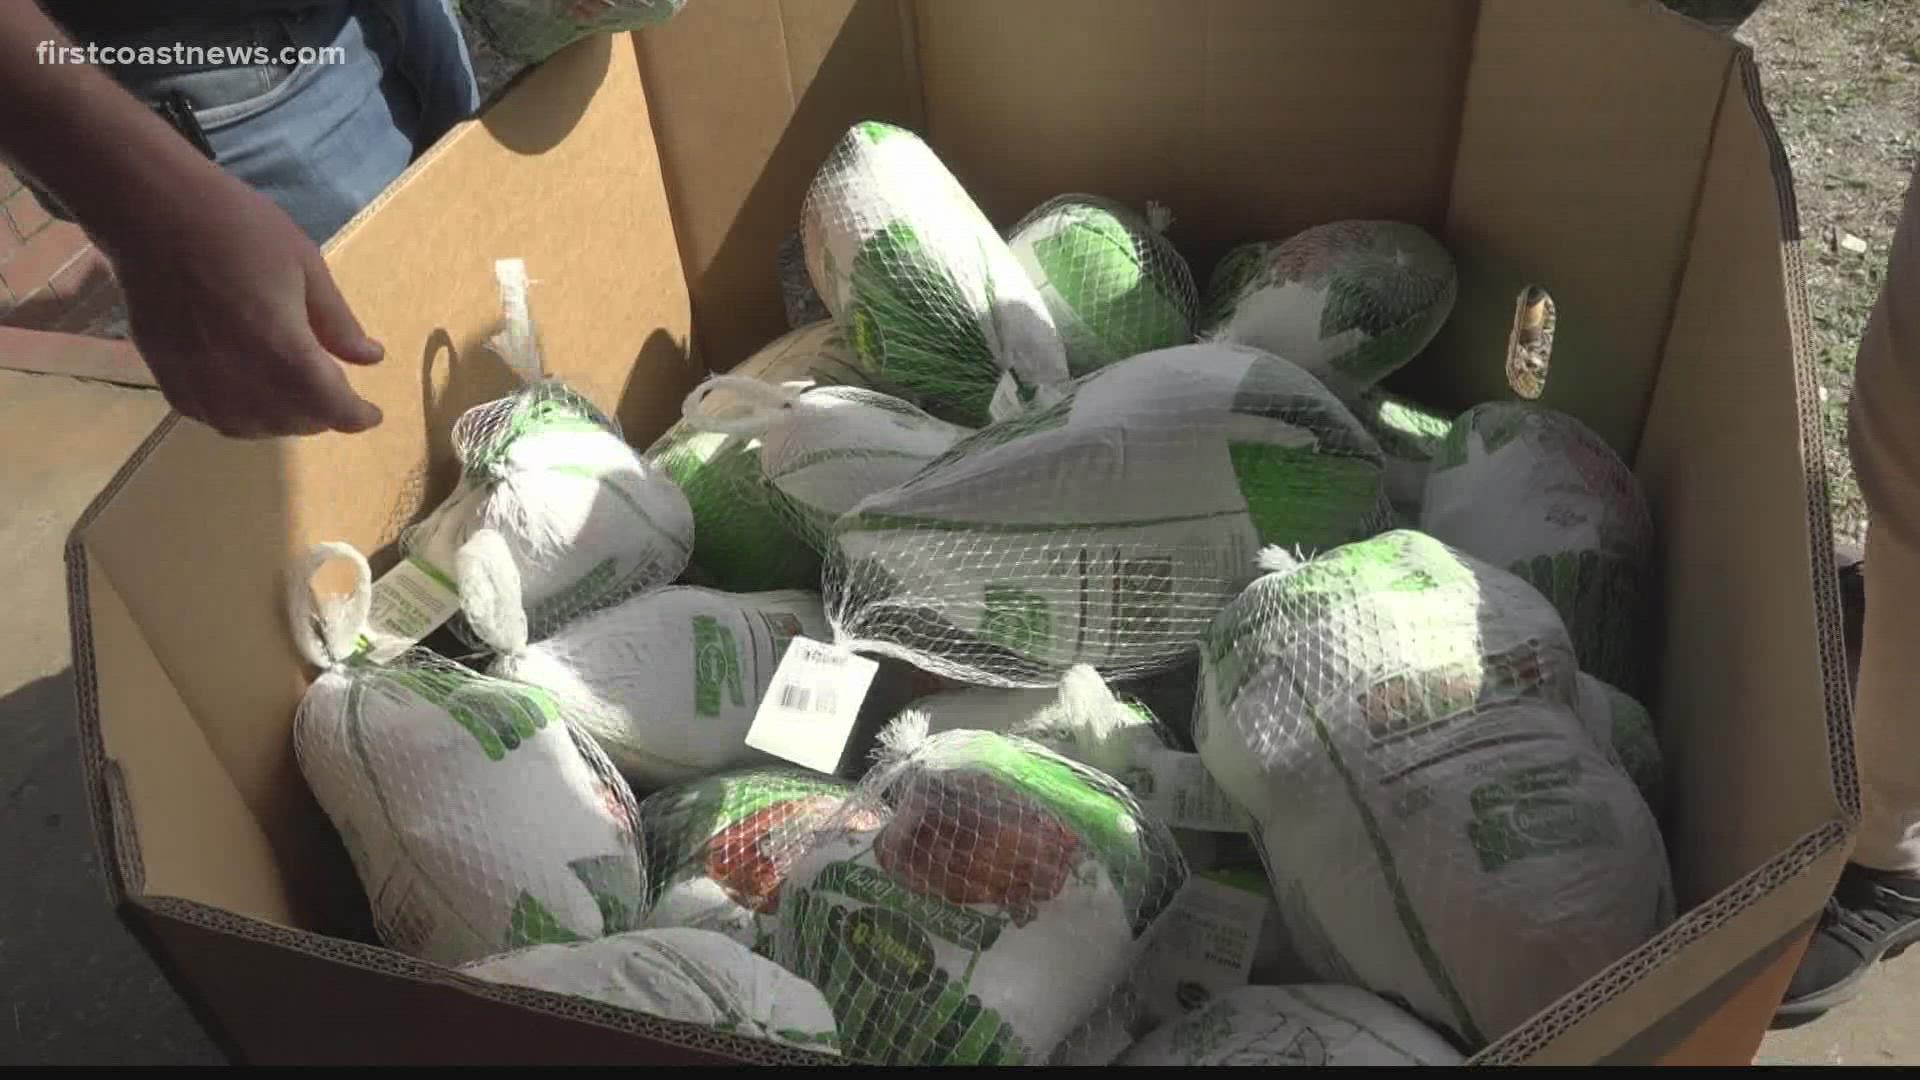 For the past 12 years, Casey Jones has been collecting money and delivering turkeys to the Salvation Army for families in need in Jacksonville.